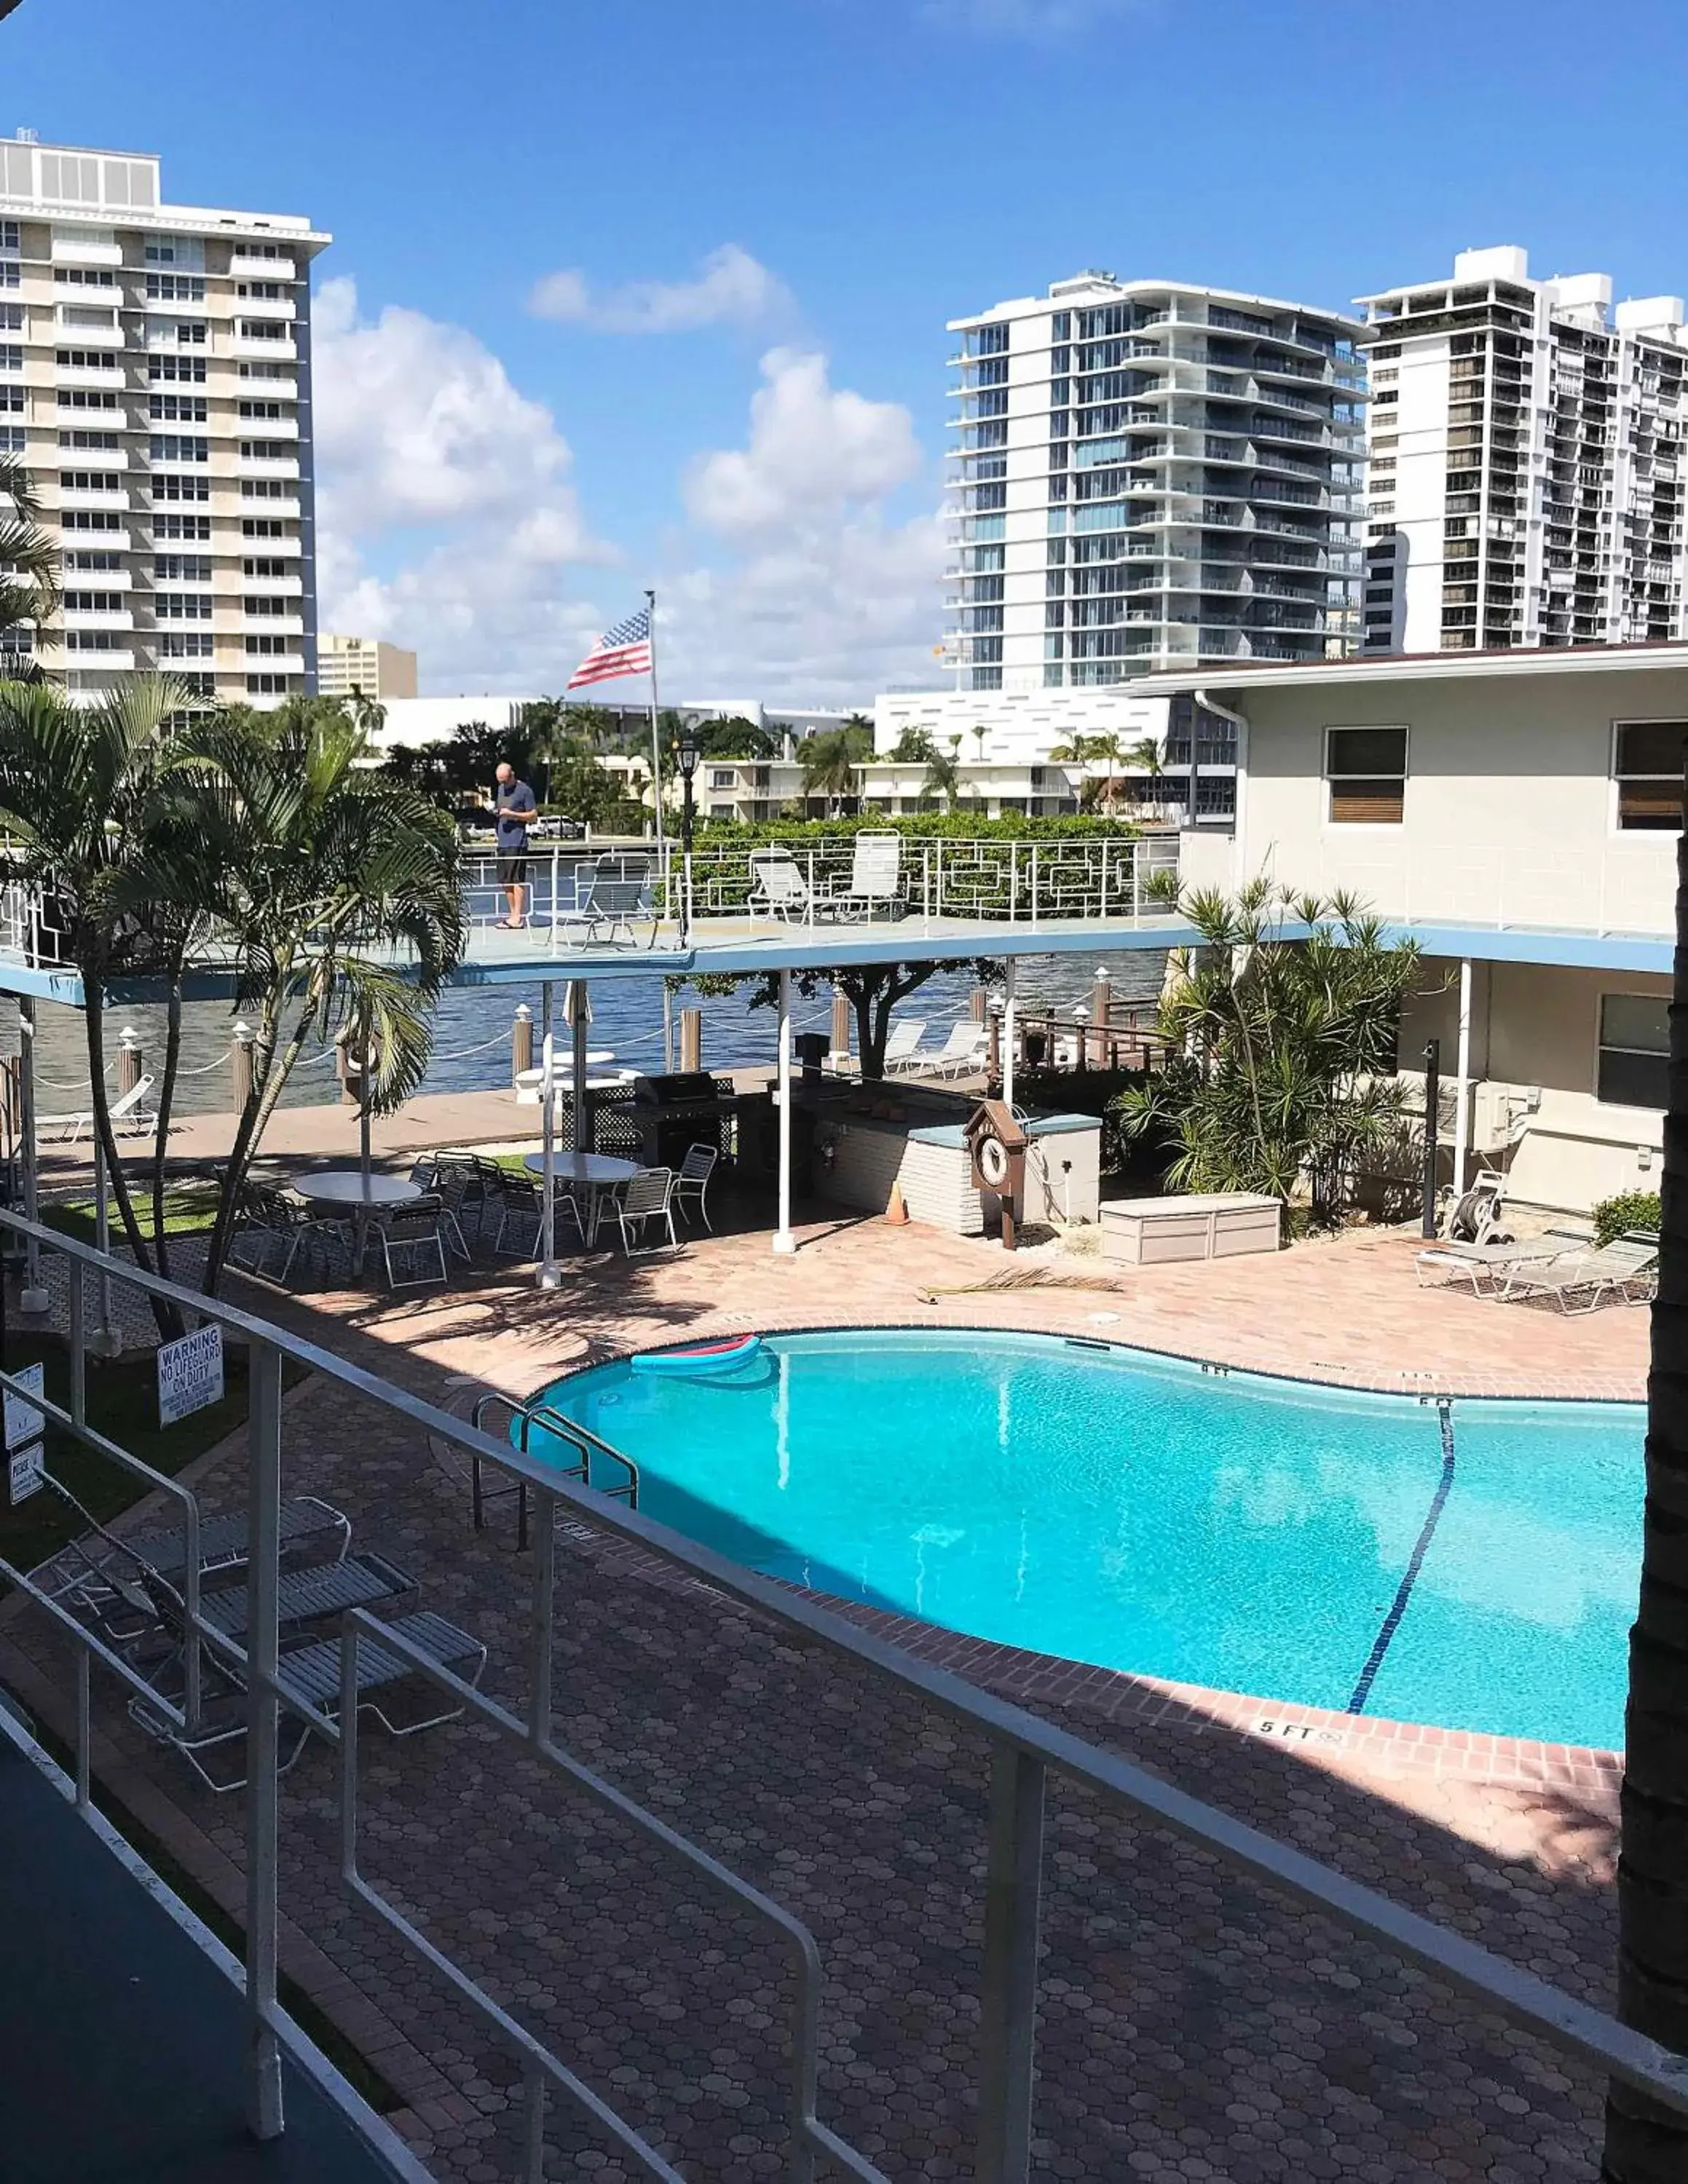 Swimming Pool in Holiday Isle Yacht Club